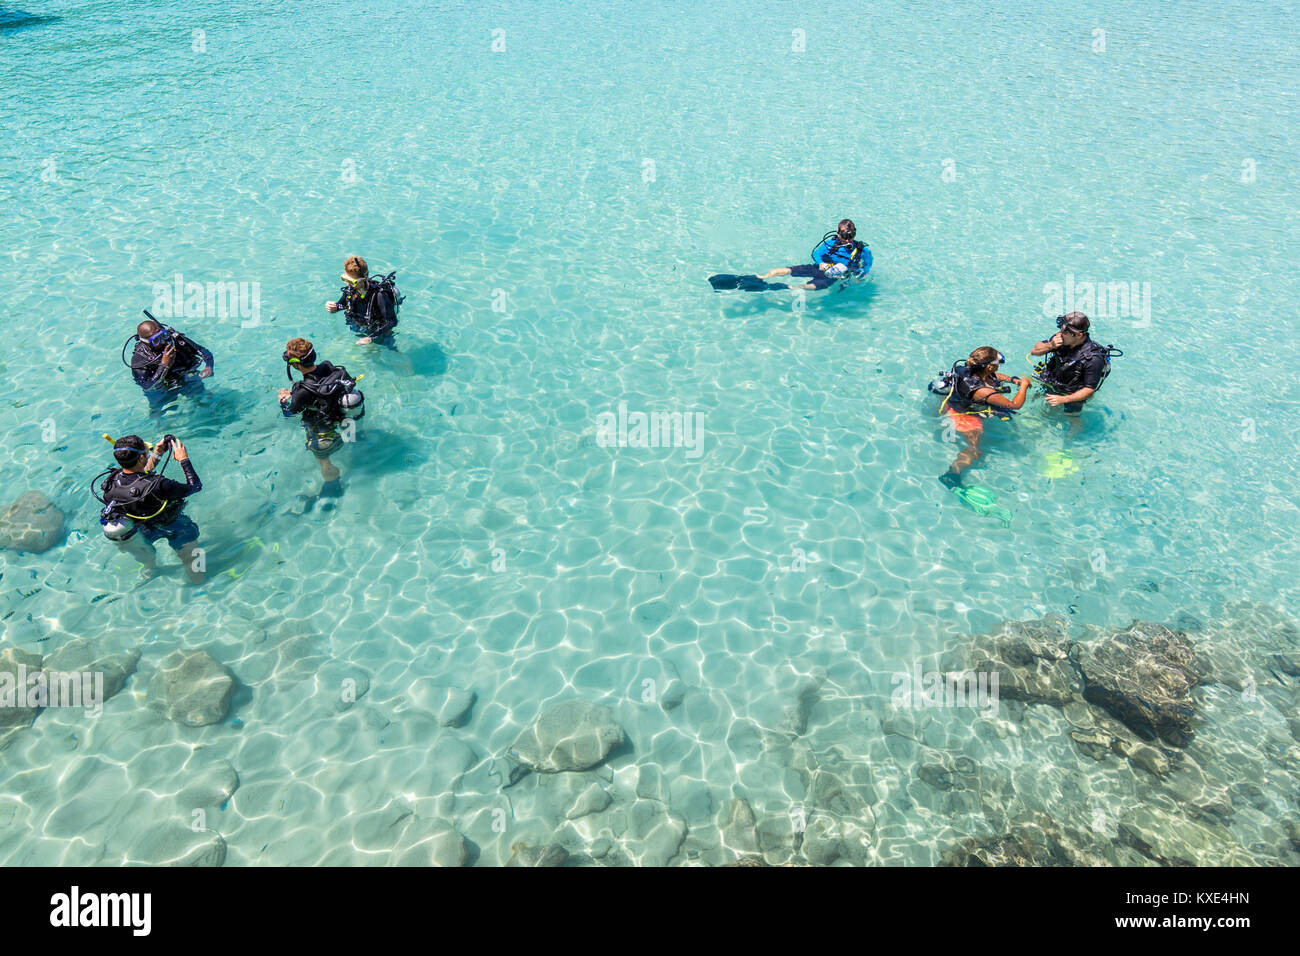 A group of Scuba Diving students have a lesson in the shallow crystal clear water of a Tropical Island. Stock Photo